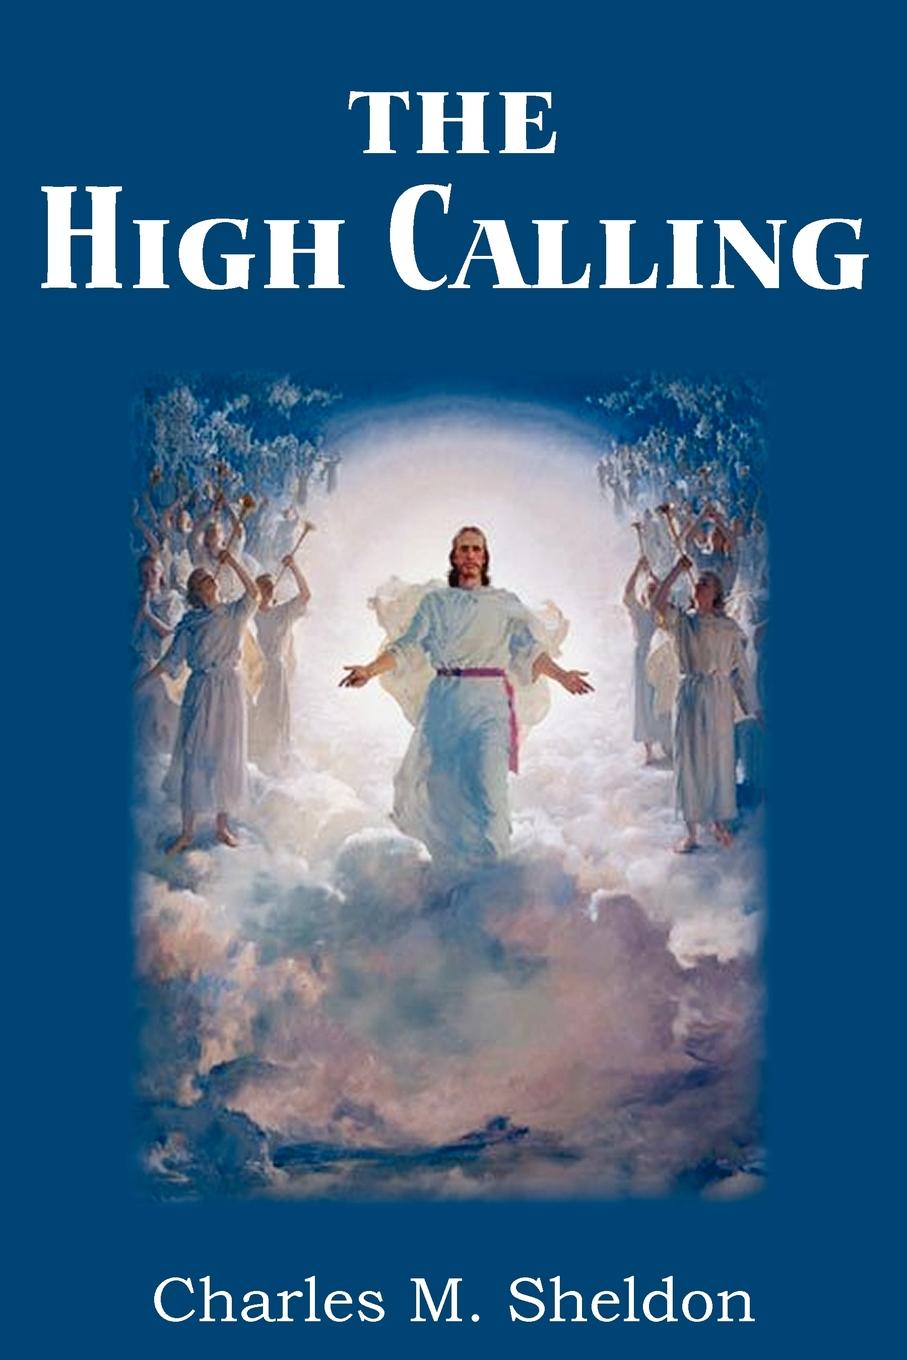 Higher calling. The higher calling COMMY book.